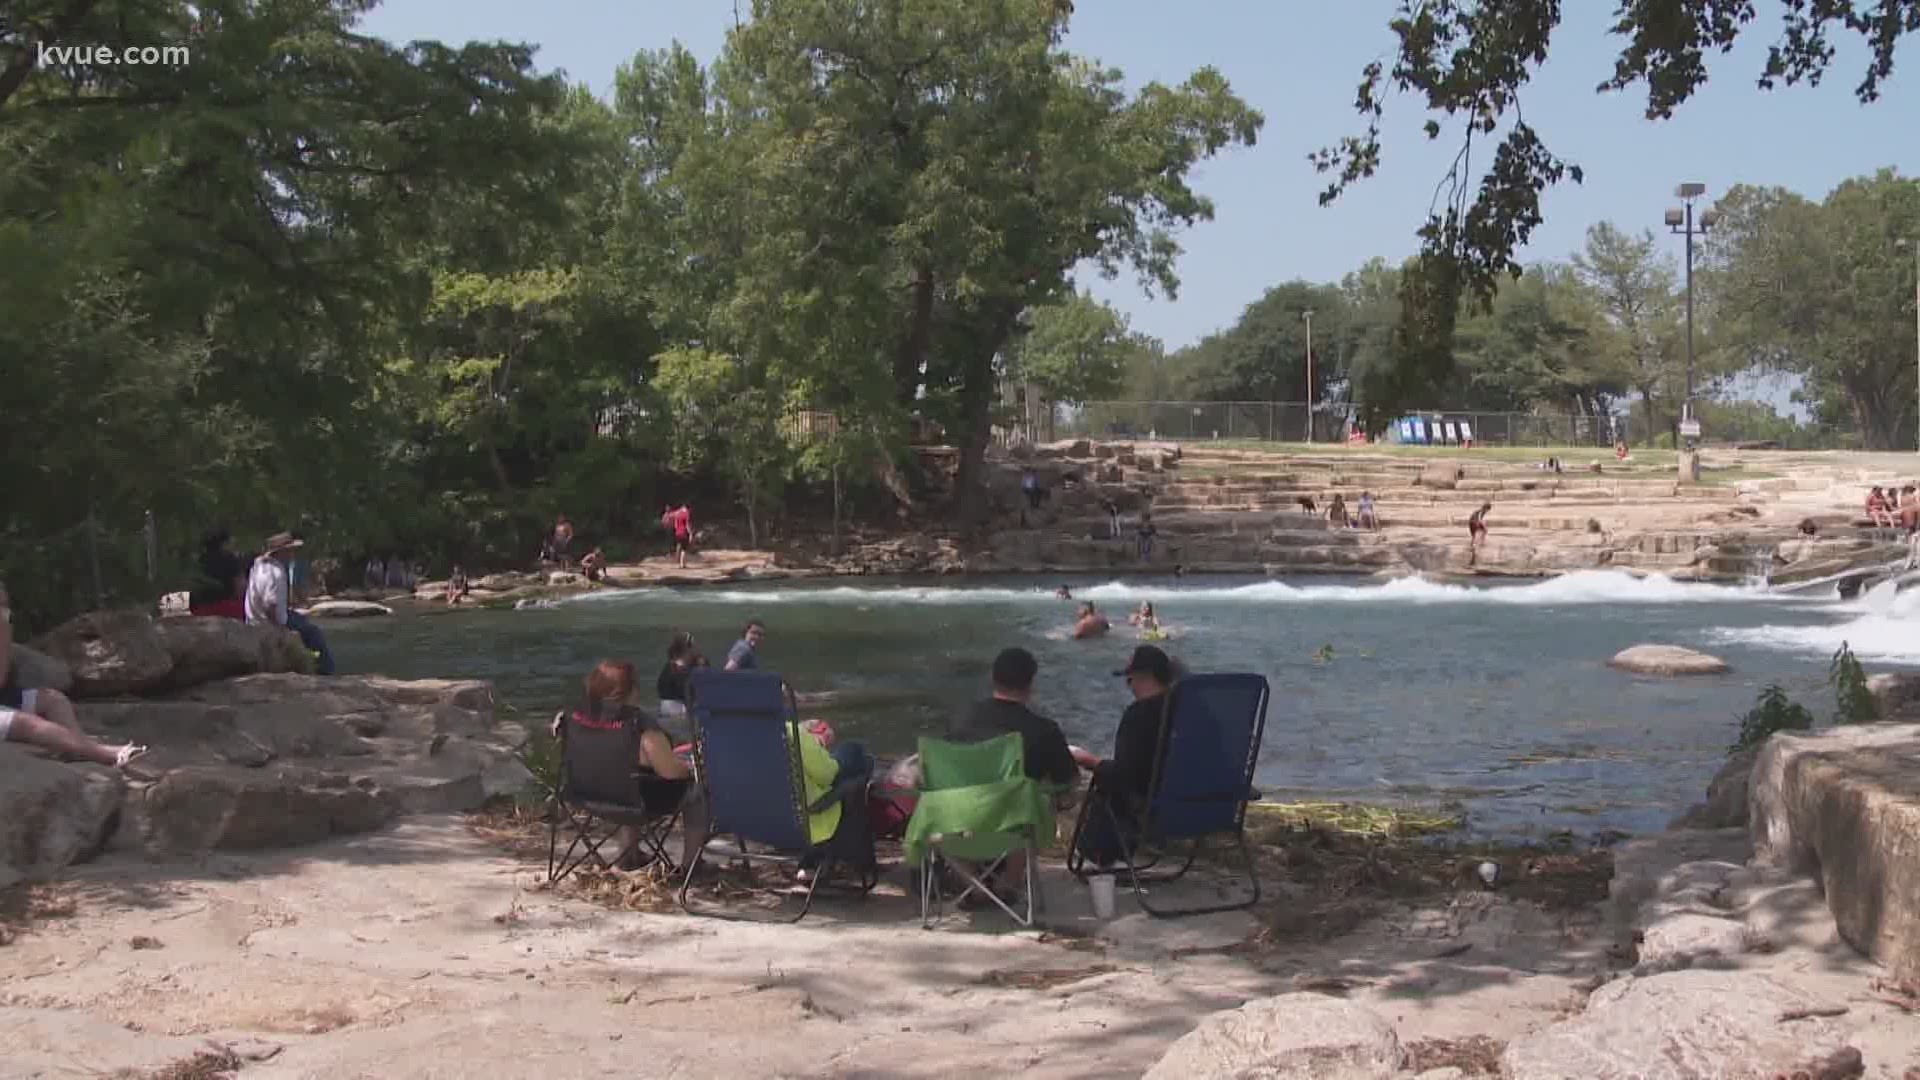 San Marcos parks reopened Sept. 16 after several months of being closed.